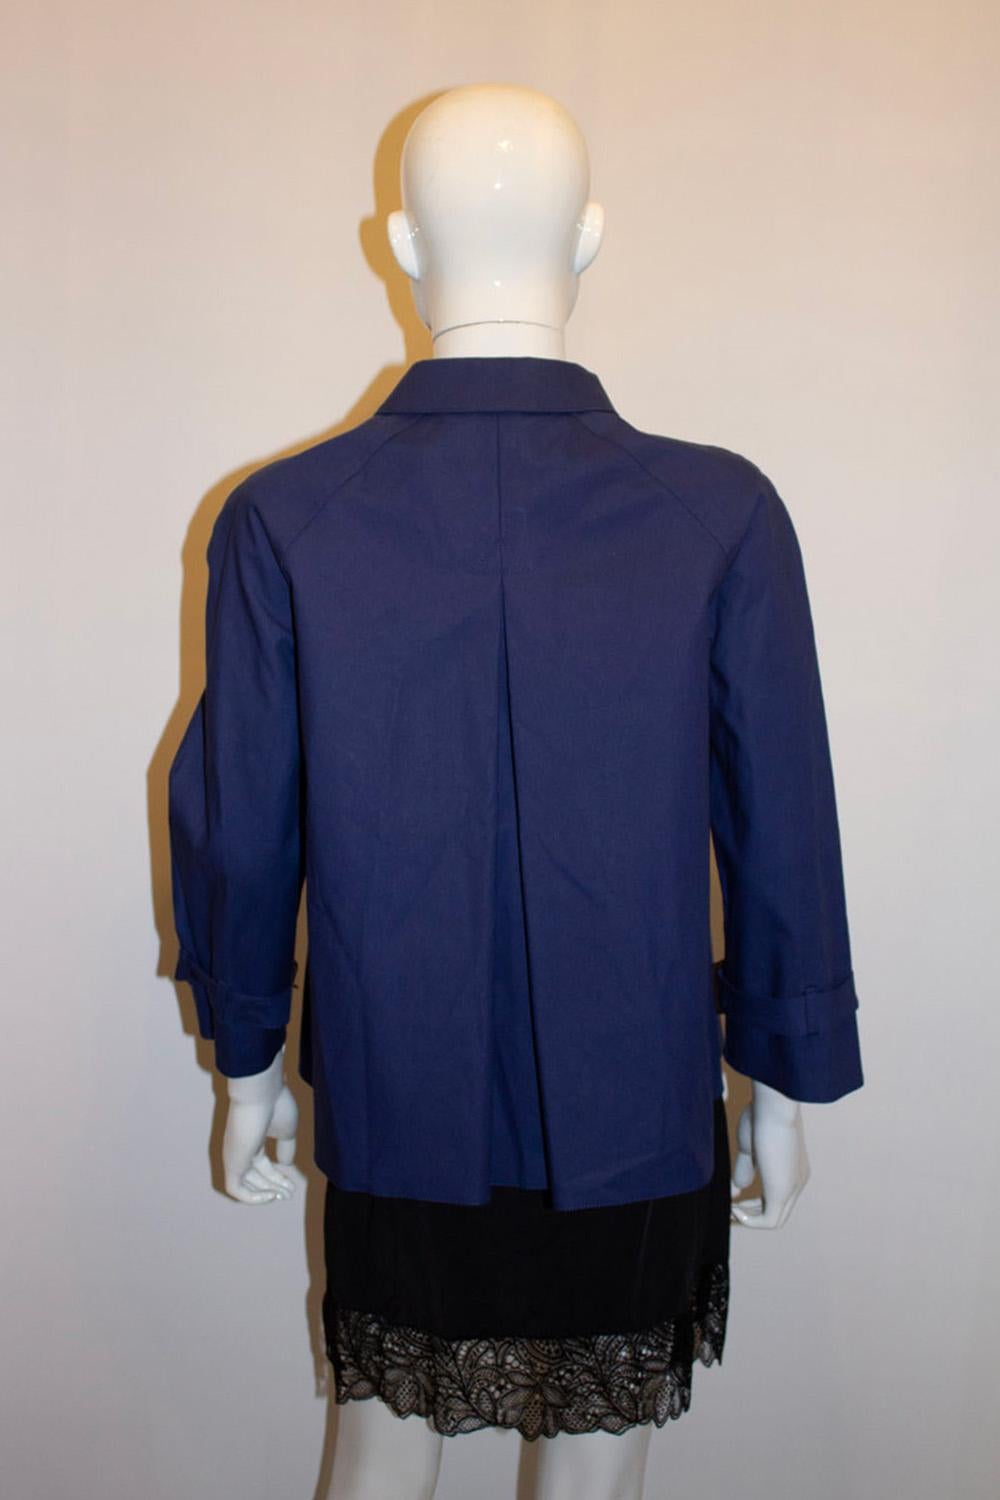 A fun, chic and useful jacket by Prada, Art number 280951. The jacket is 100 % cotton , with a button front and belt around the cuffs. It  has an A line vent at the back and is unlined. Measurements:
Bust up to 40'', length 25''